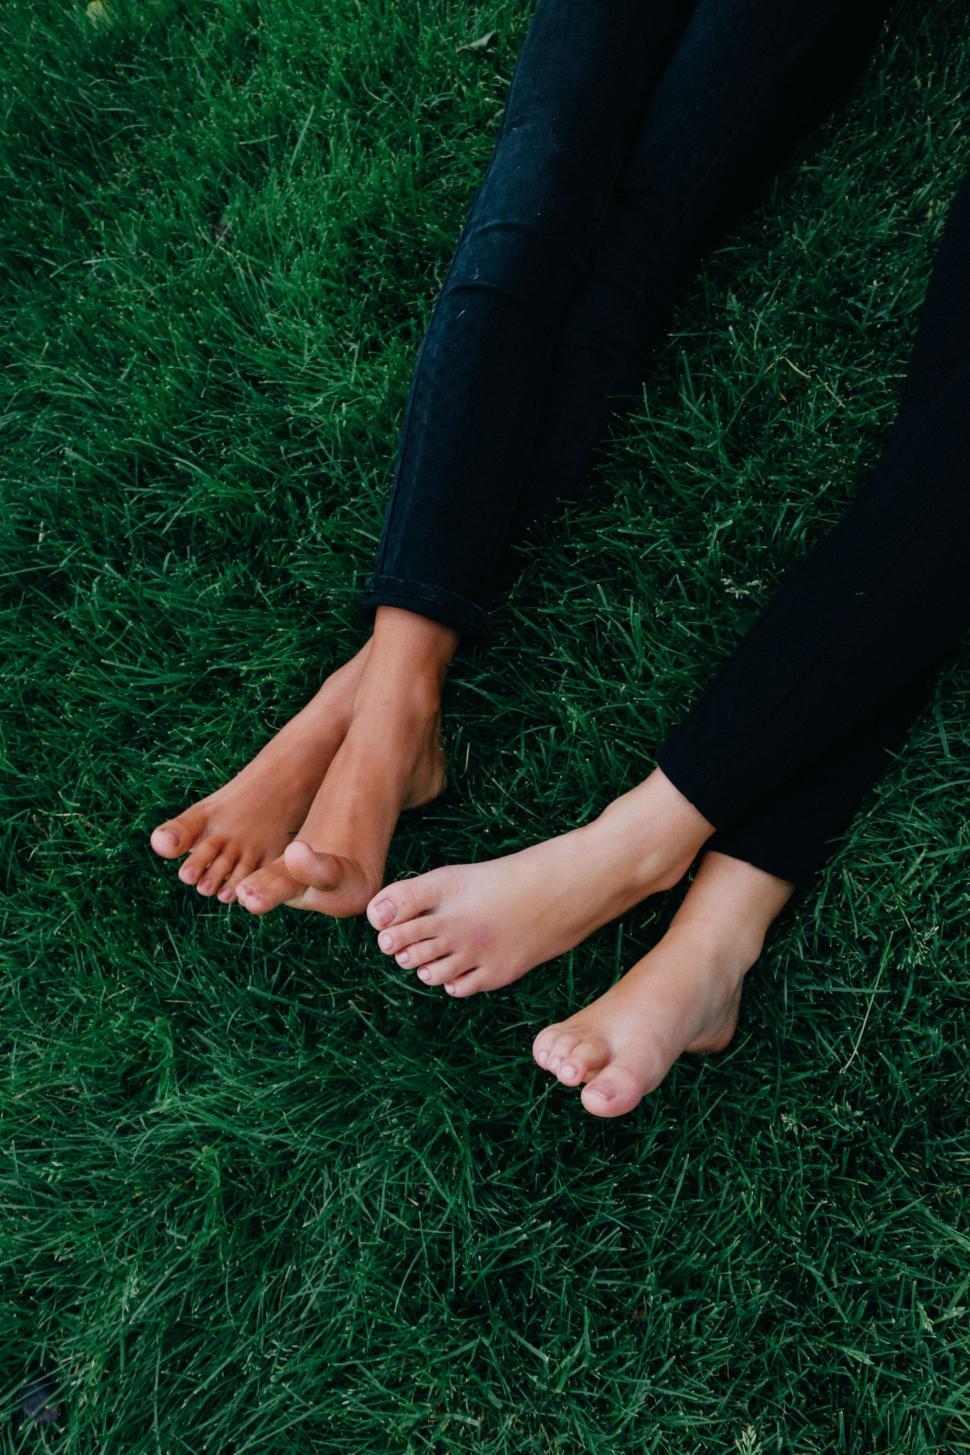 Free Image of Two Pair Of Female Feet on Grass 